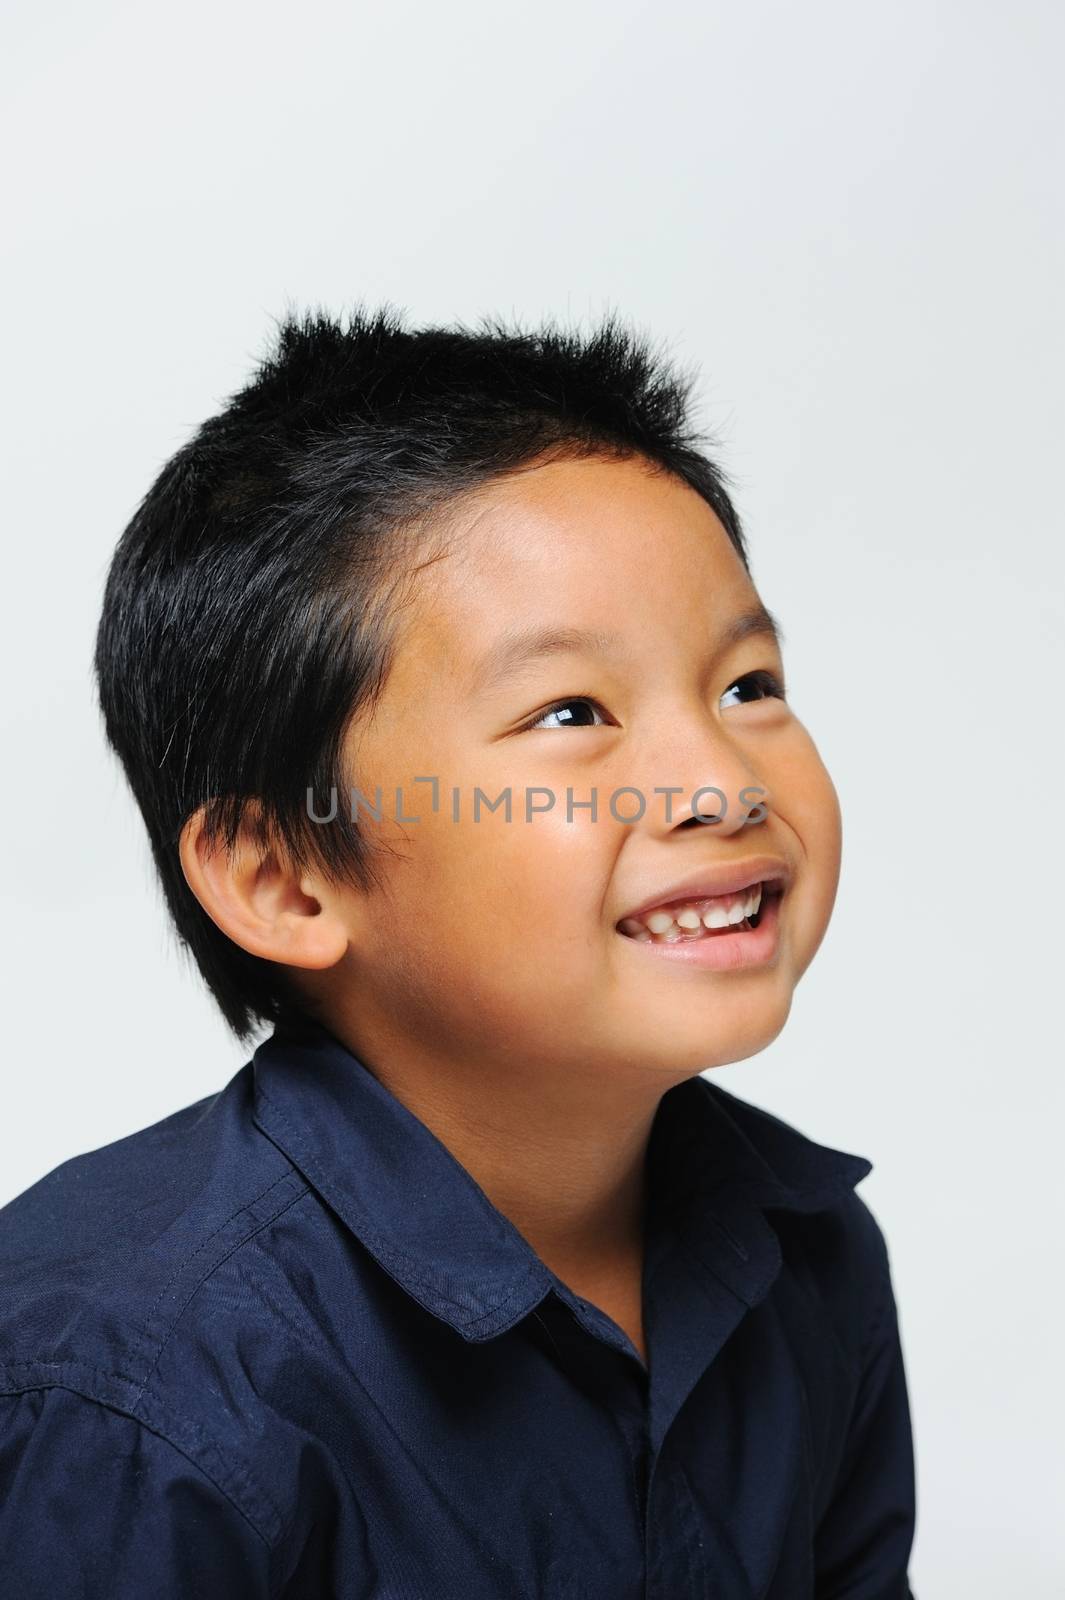 Asian boy looking up and smiling